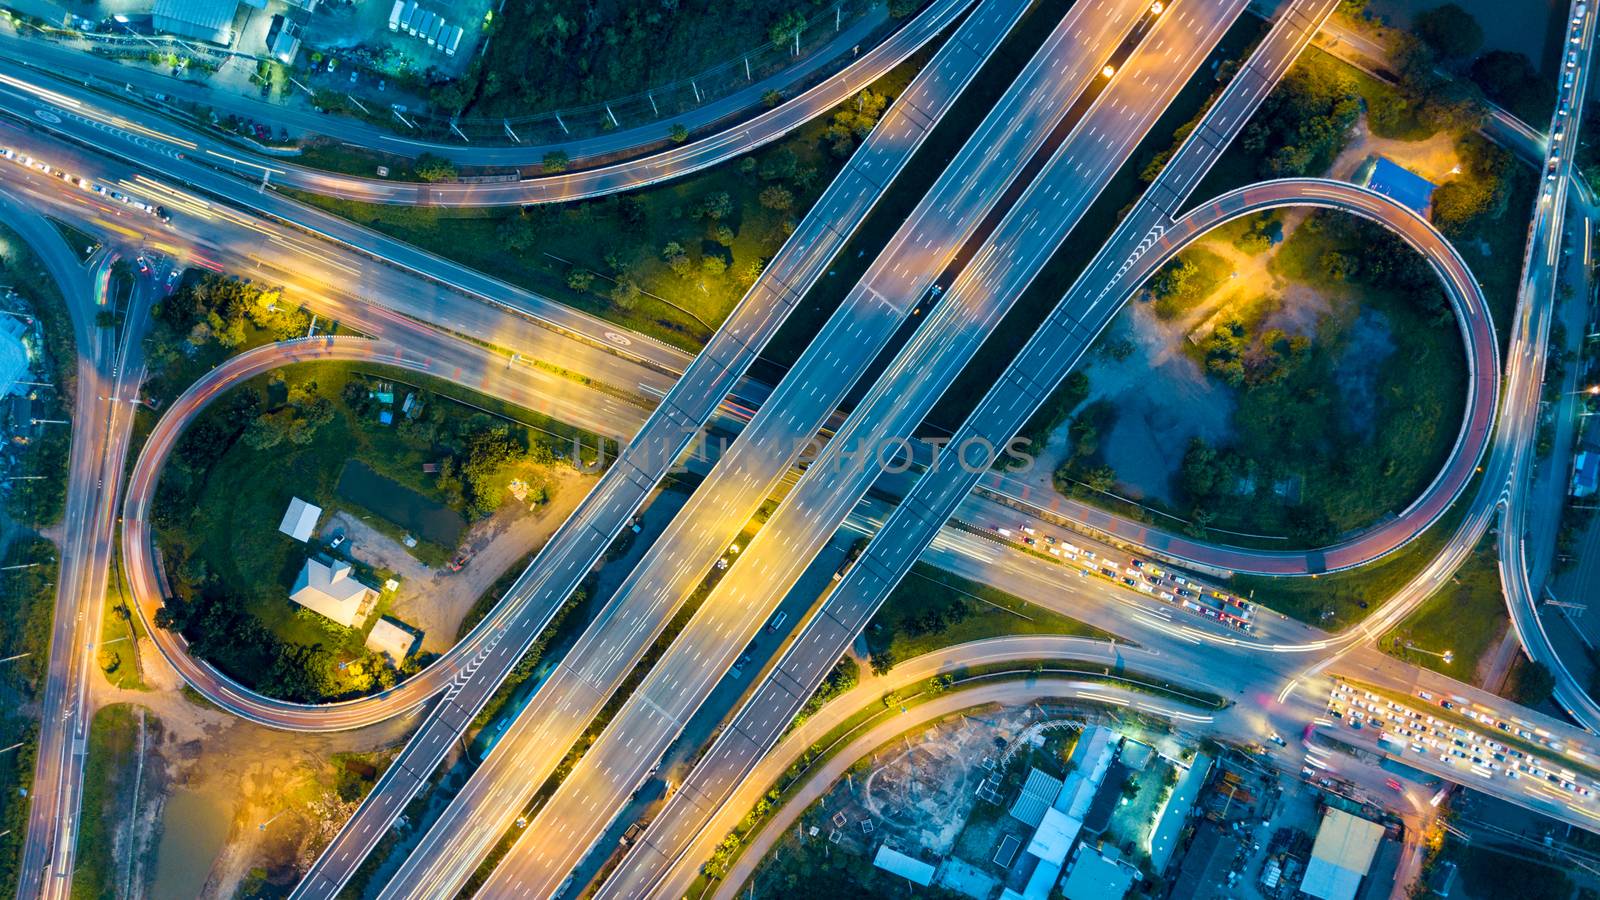 Aerial view of expressway at night by antpkr